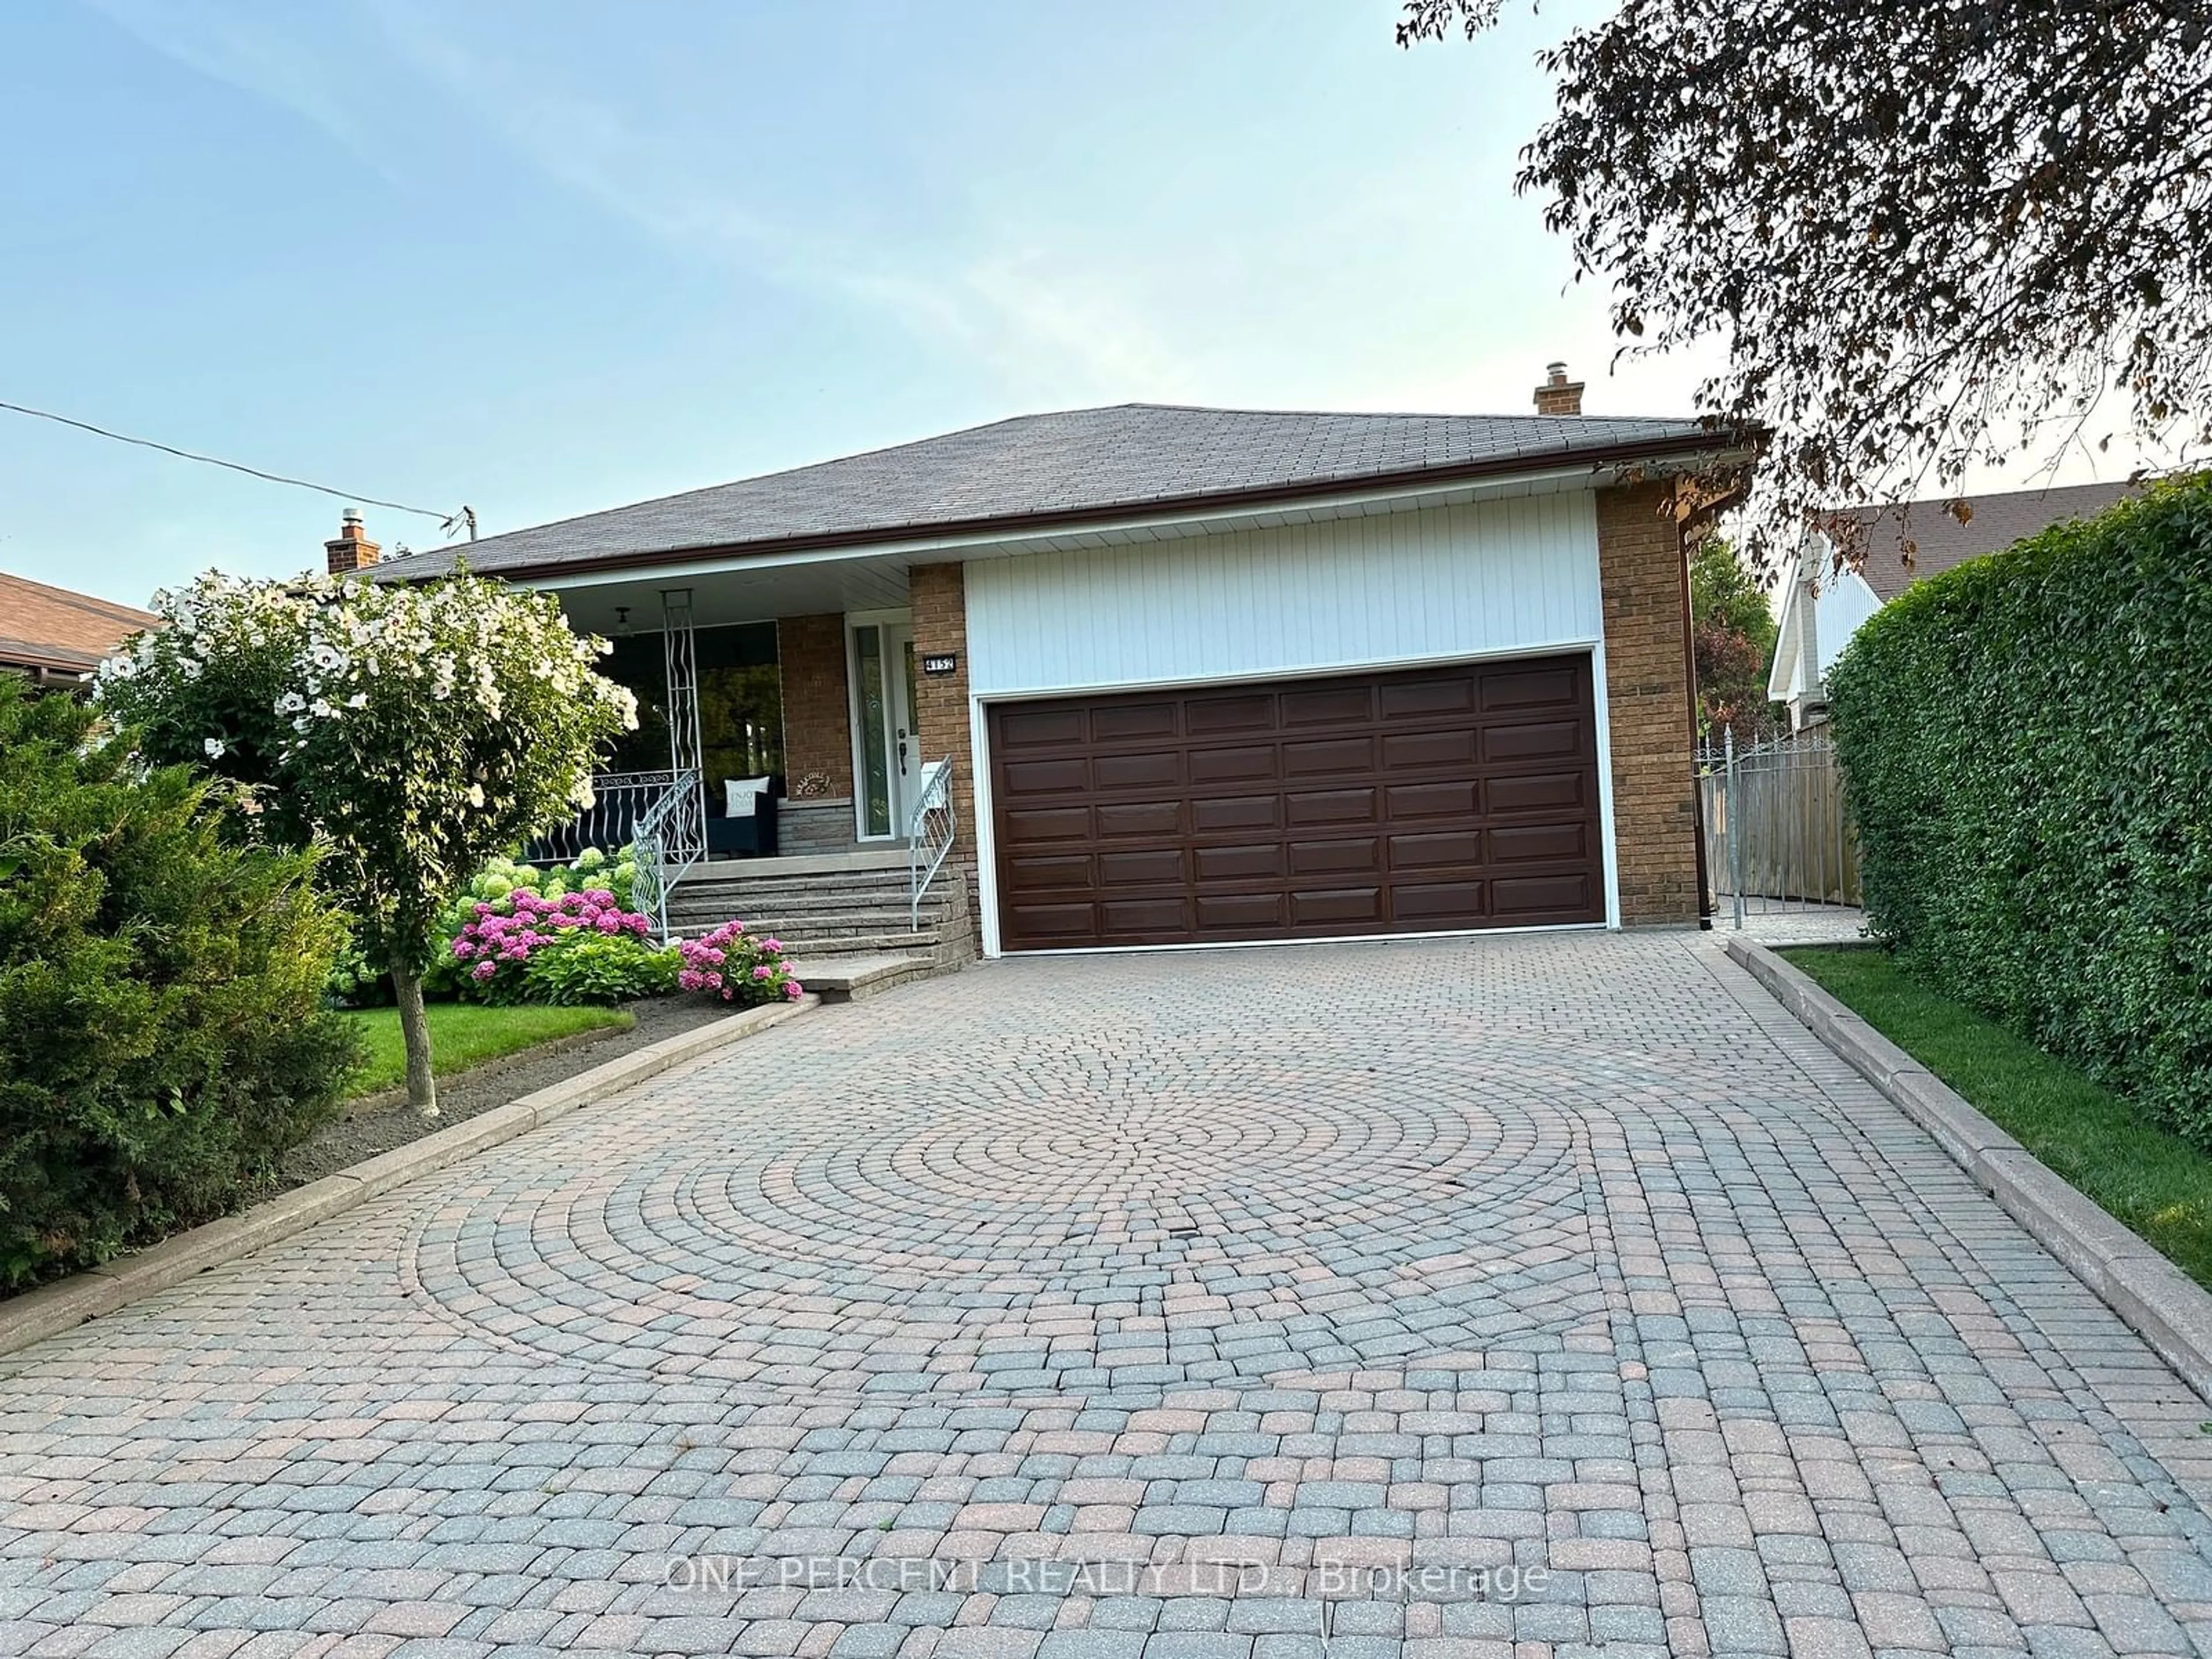 Home with brick exterior material for 4152 WILCOX Rd, Mississauga Ontario L4Z 1C1